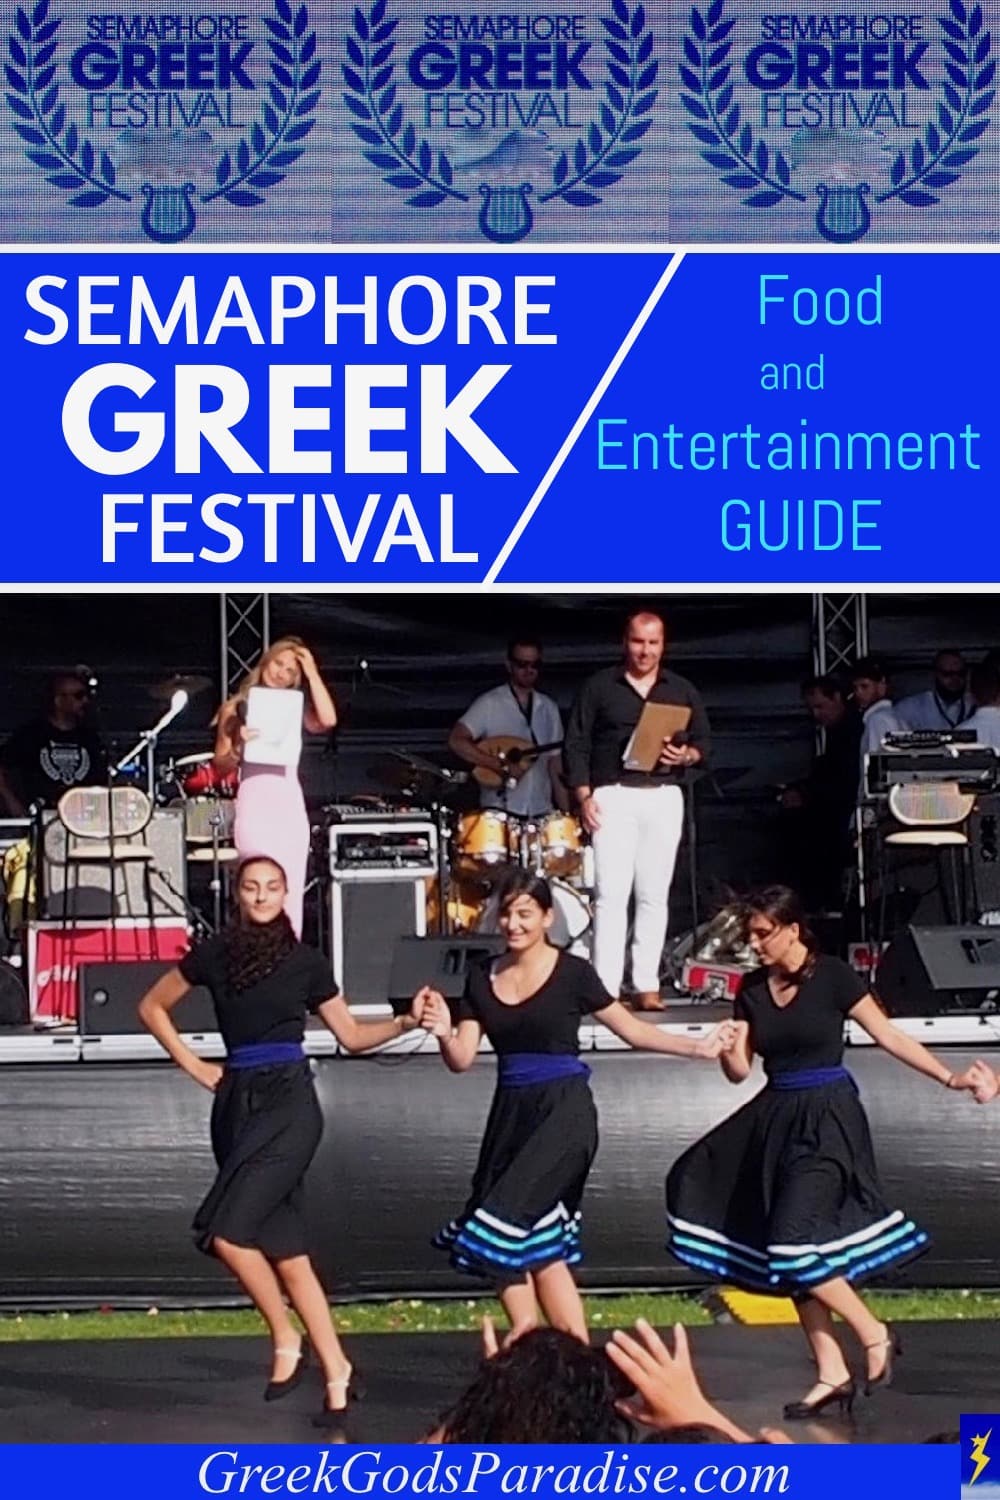 Semaphore Greek Festival Food and Entertainment Guide